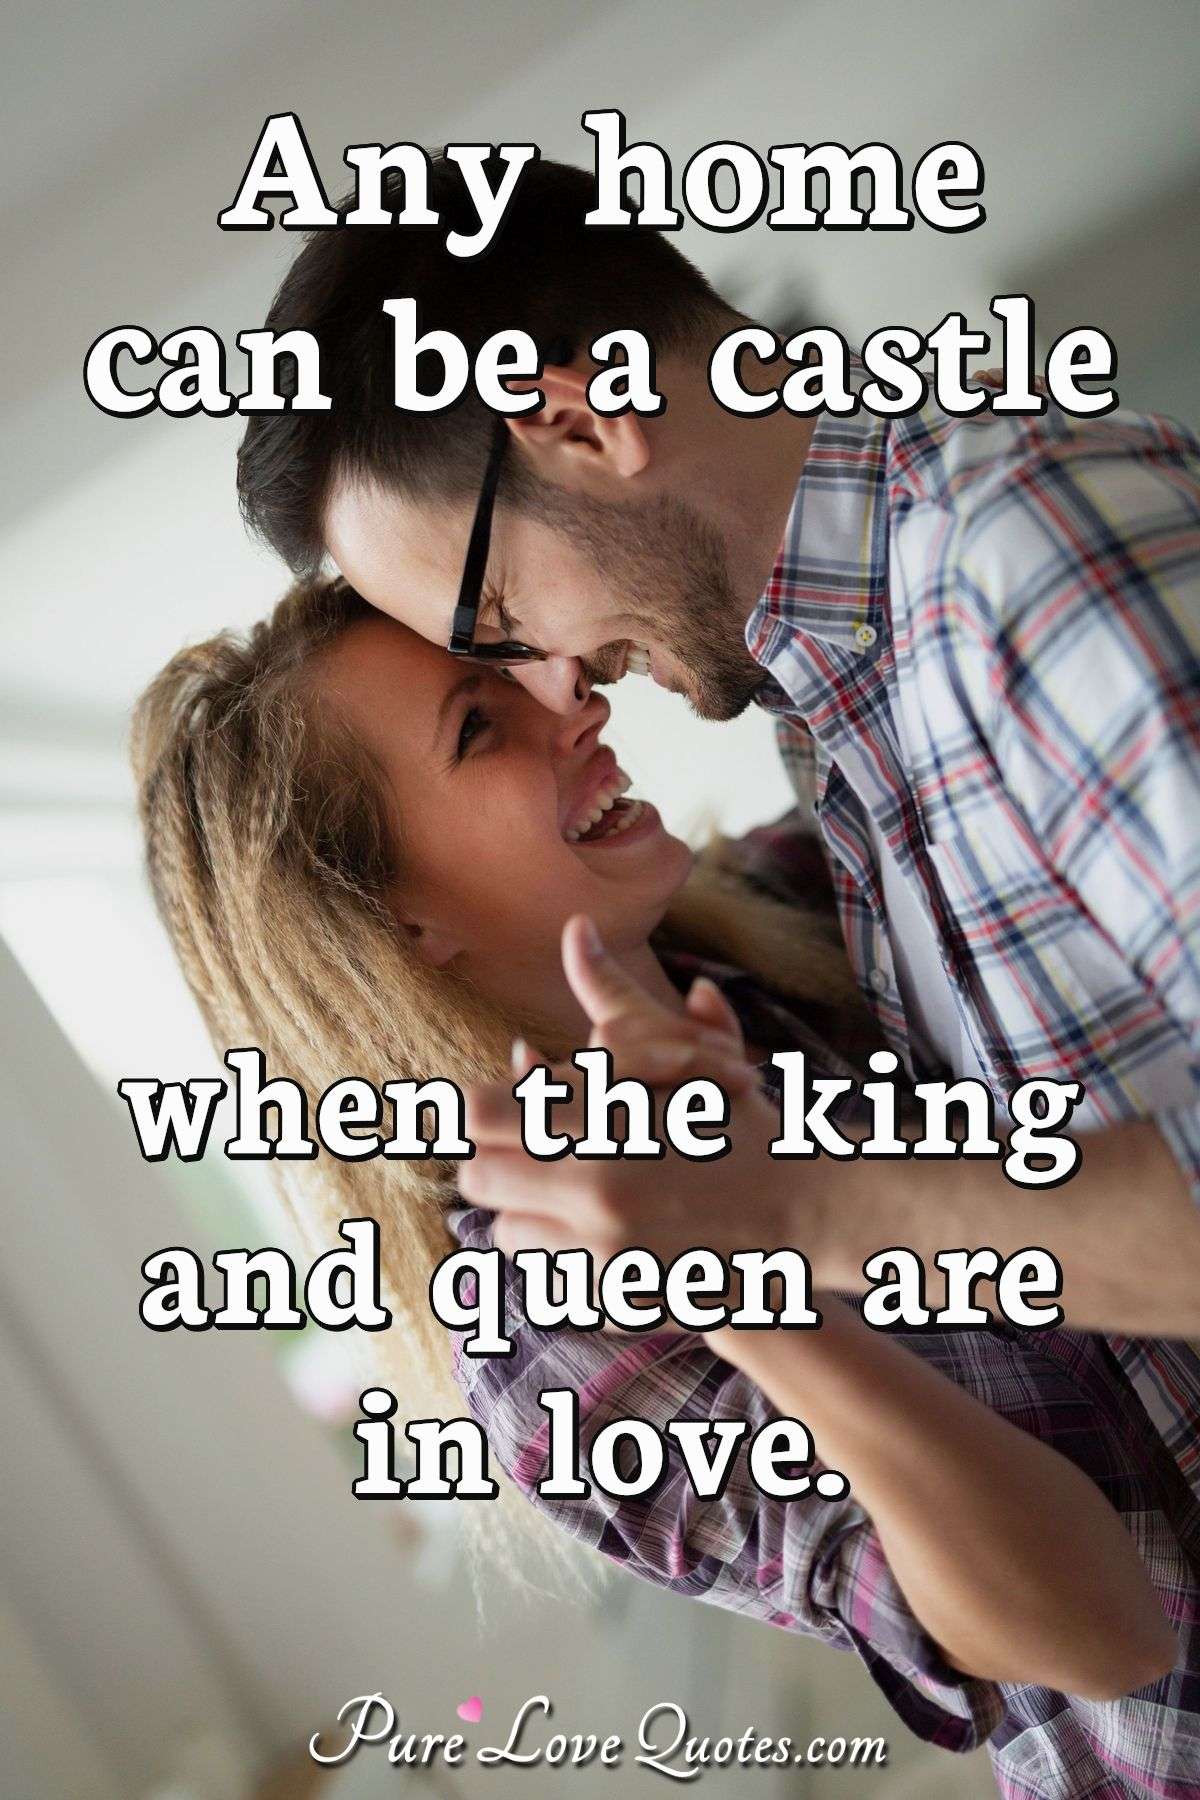 Any home can be a castle when the king and queen are in love. - Anonymous